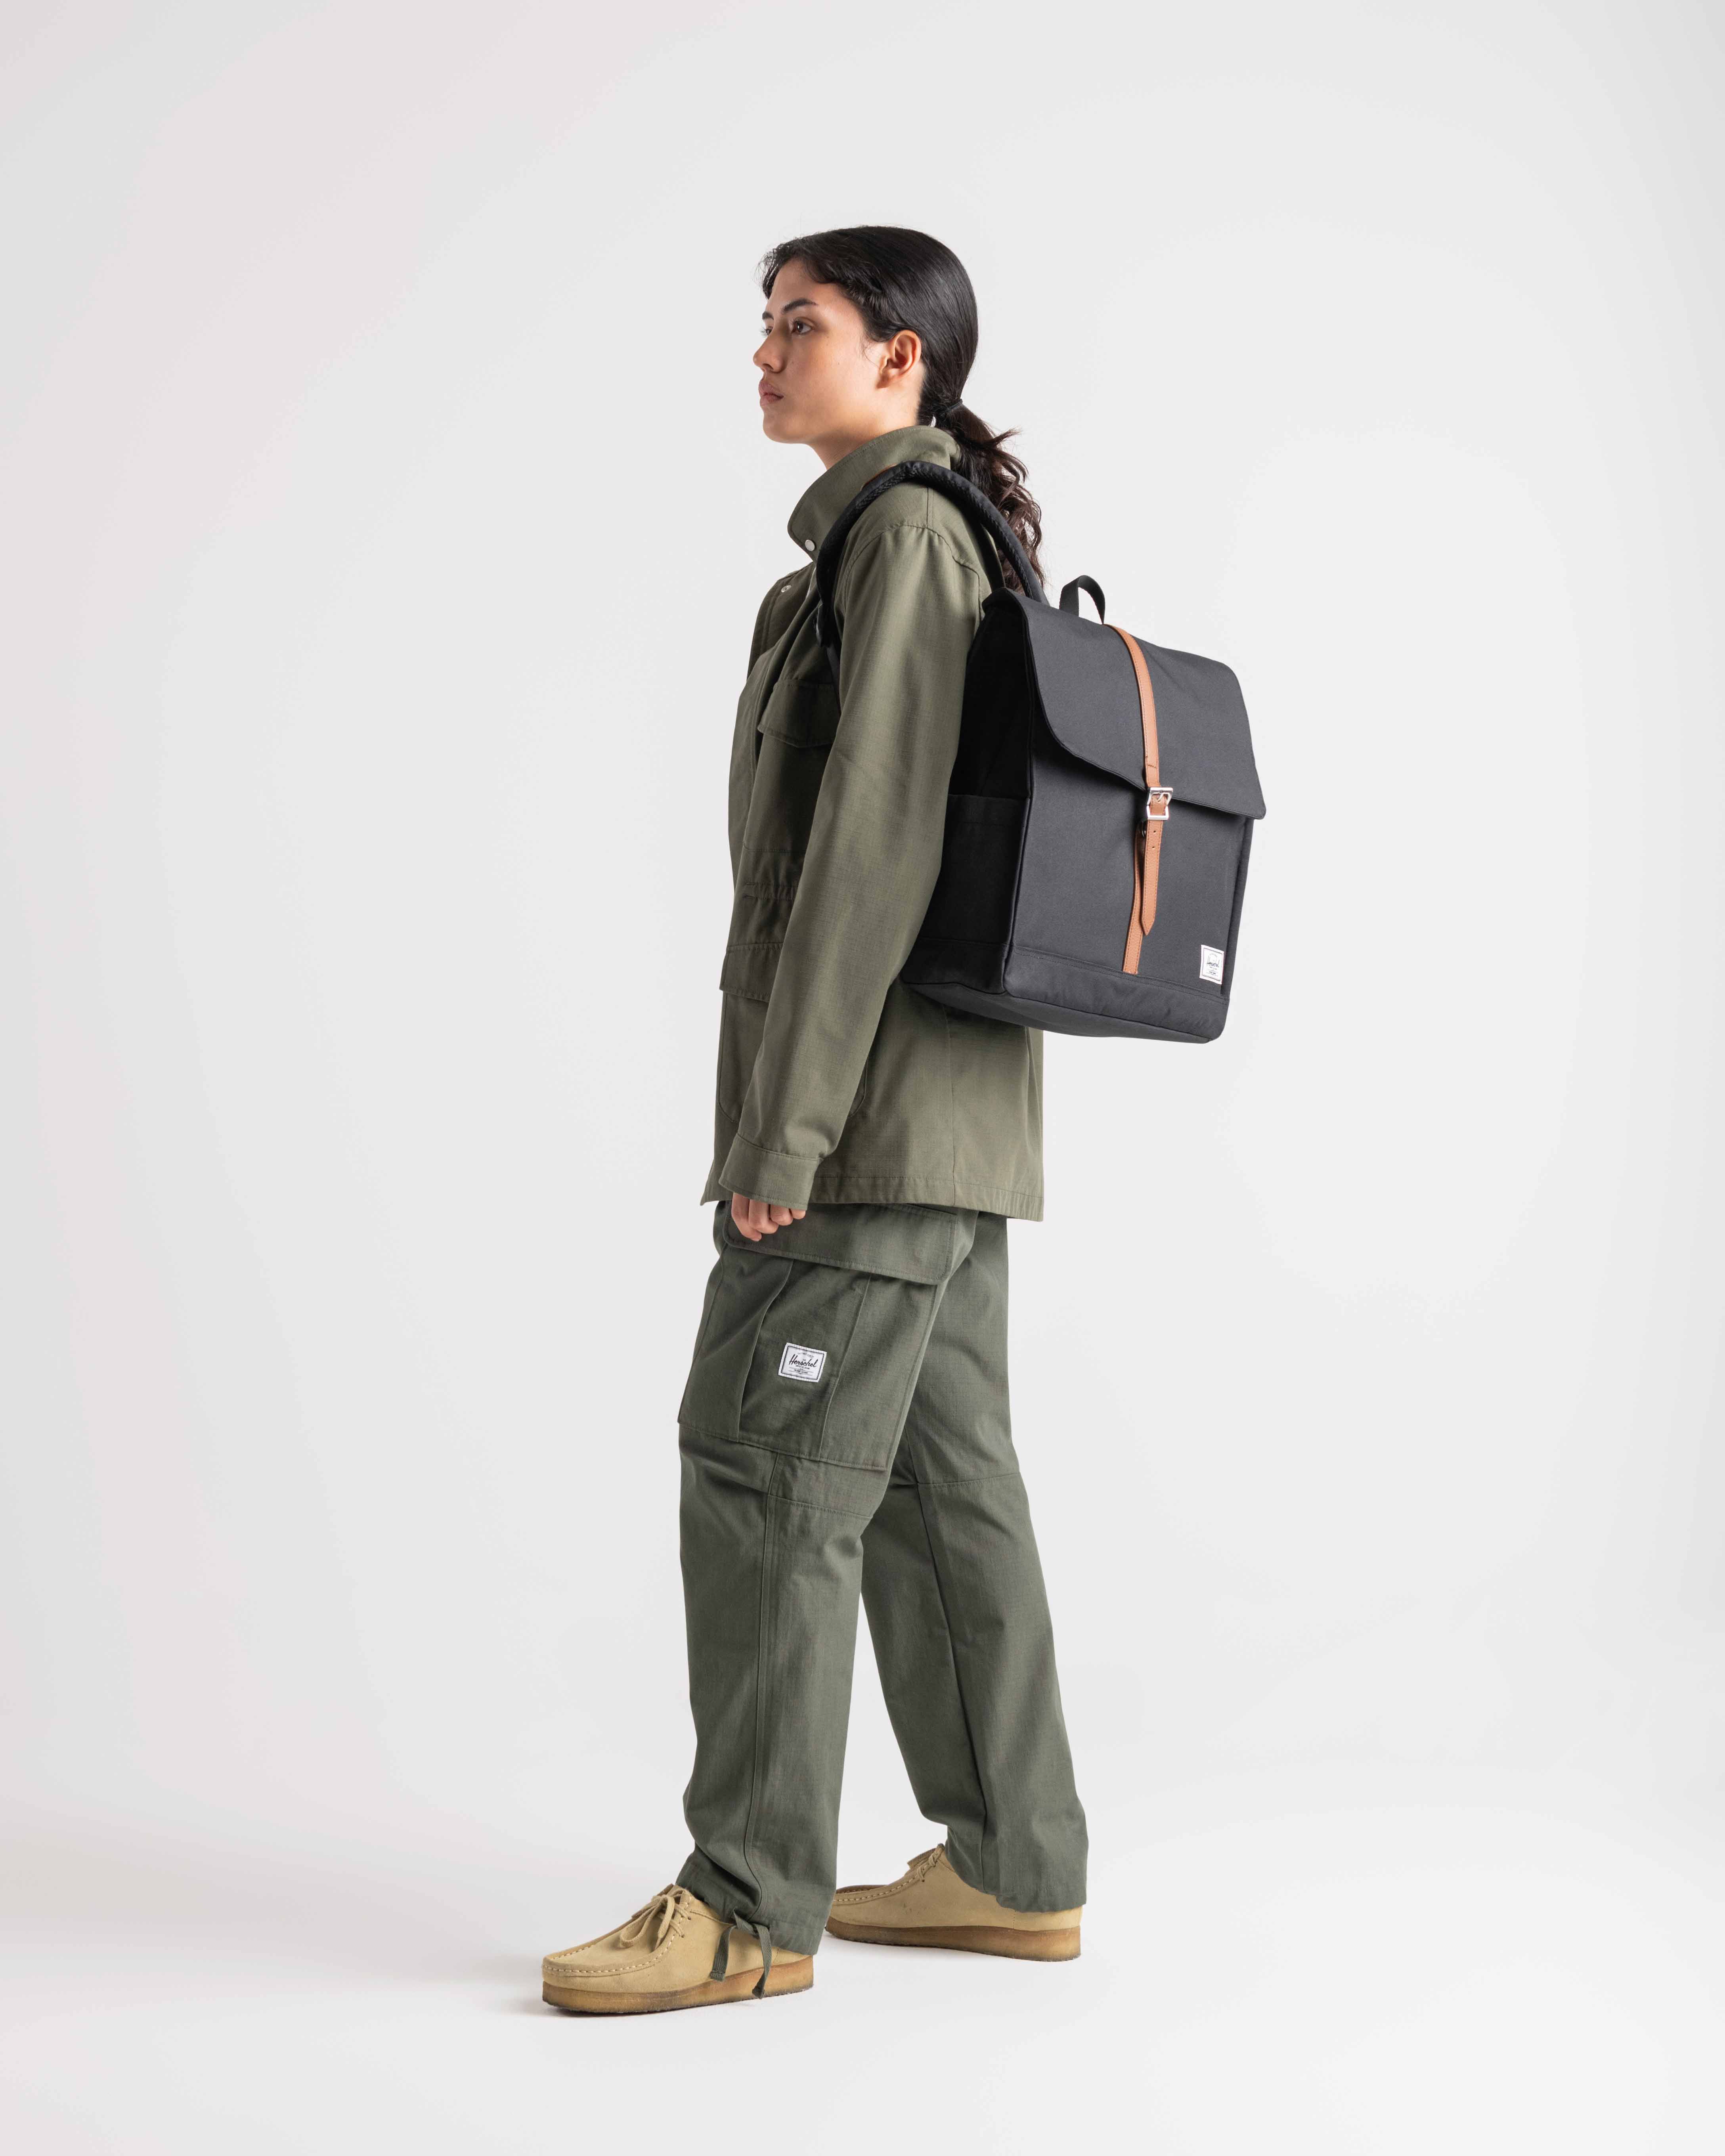 City Backpack 16L | Herschel Supply Company